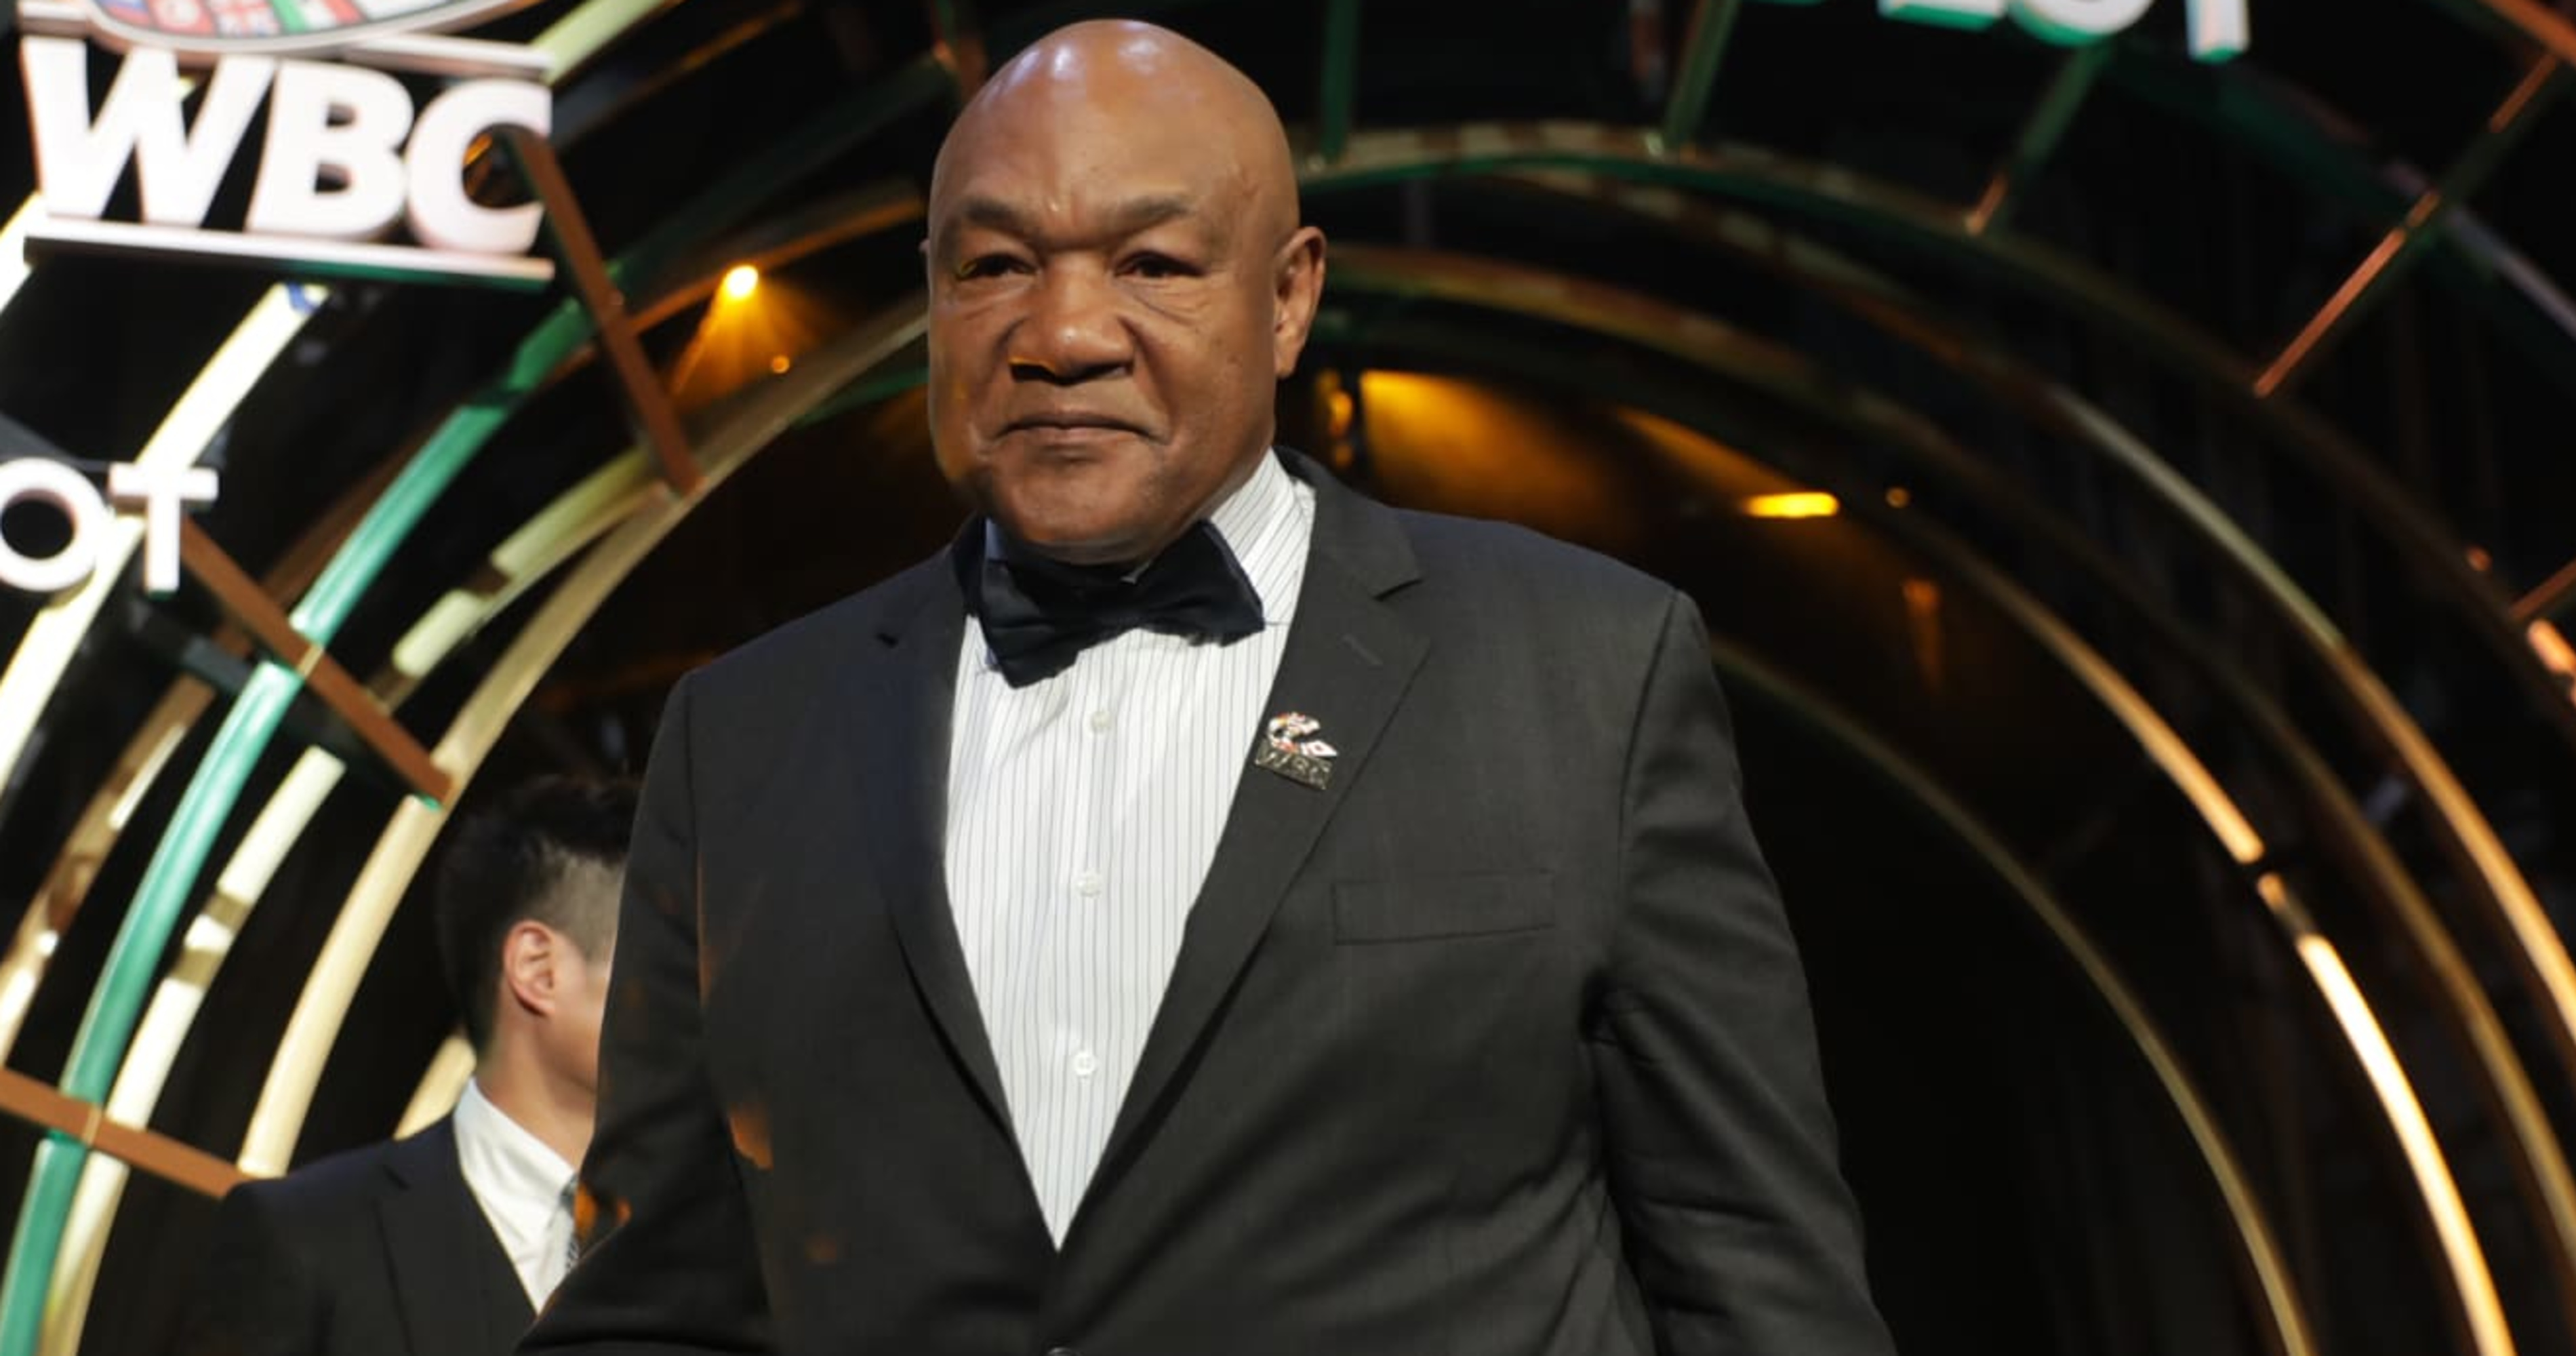 George Foreman Sued for Alleged Sexual Assault of 2 Minors in 1970s